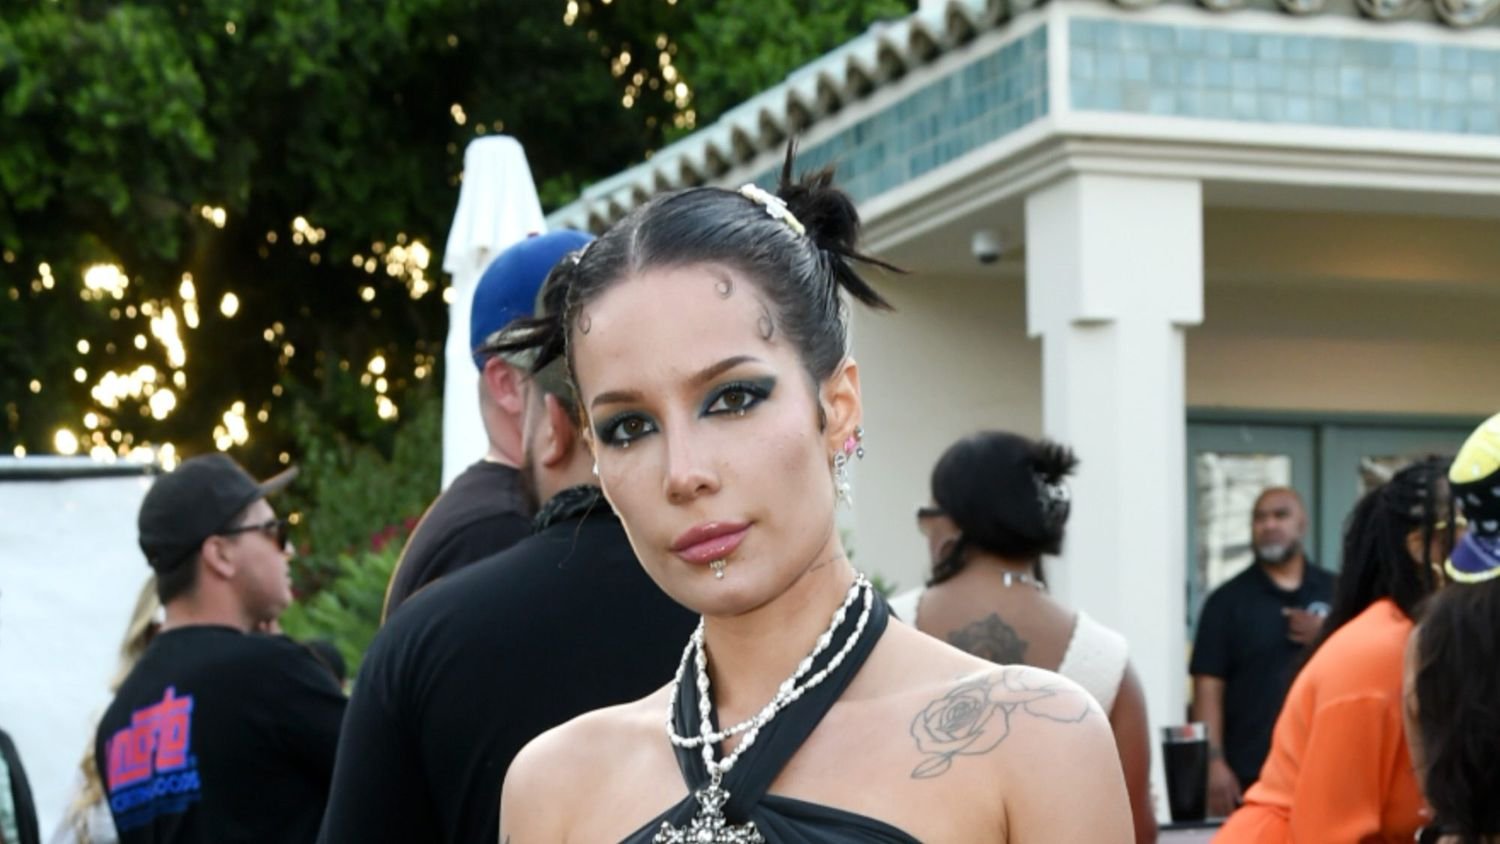 Halsey's Coachella Look Included Space Buns and an Underboob-Baring Top